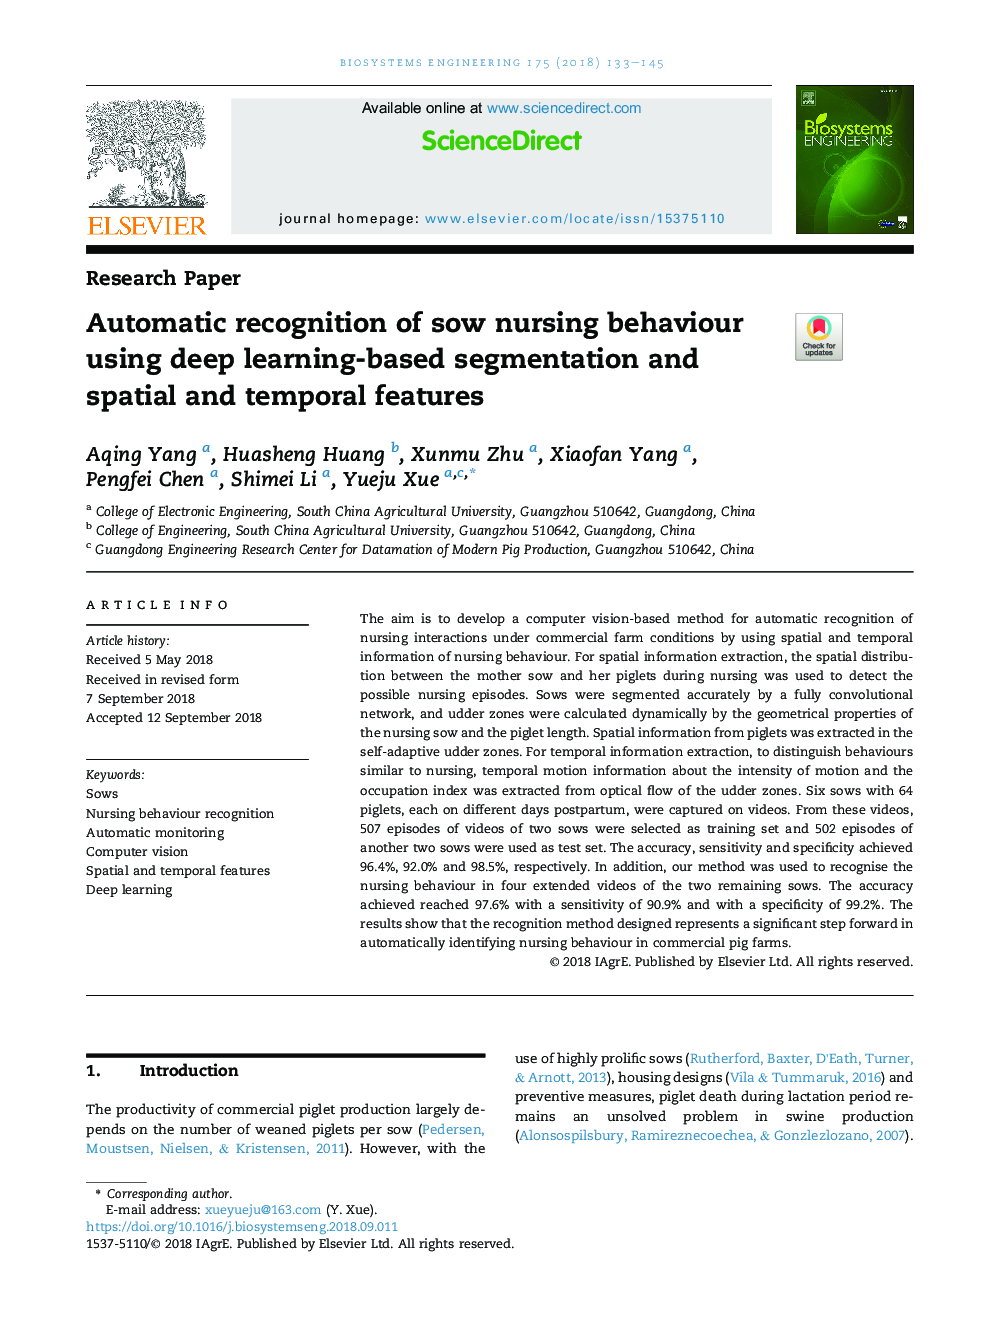 Automatic recognition of sow nursing behaviour using deep learning-based segmentation and spatial and temporal features